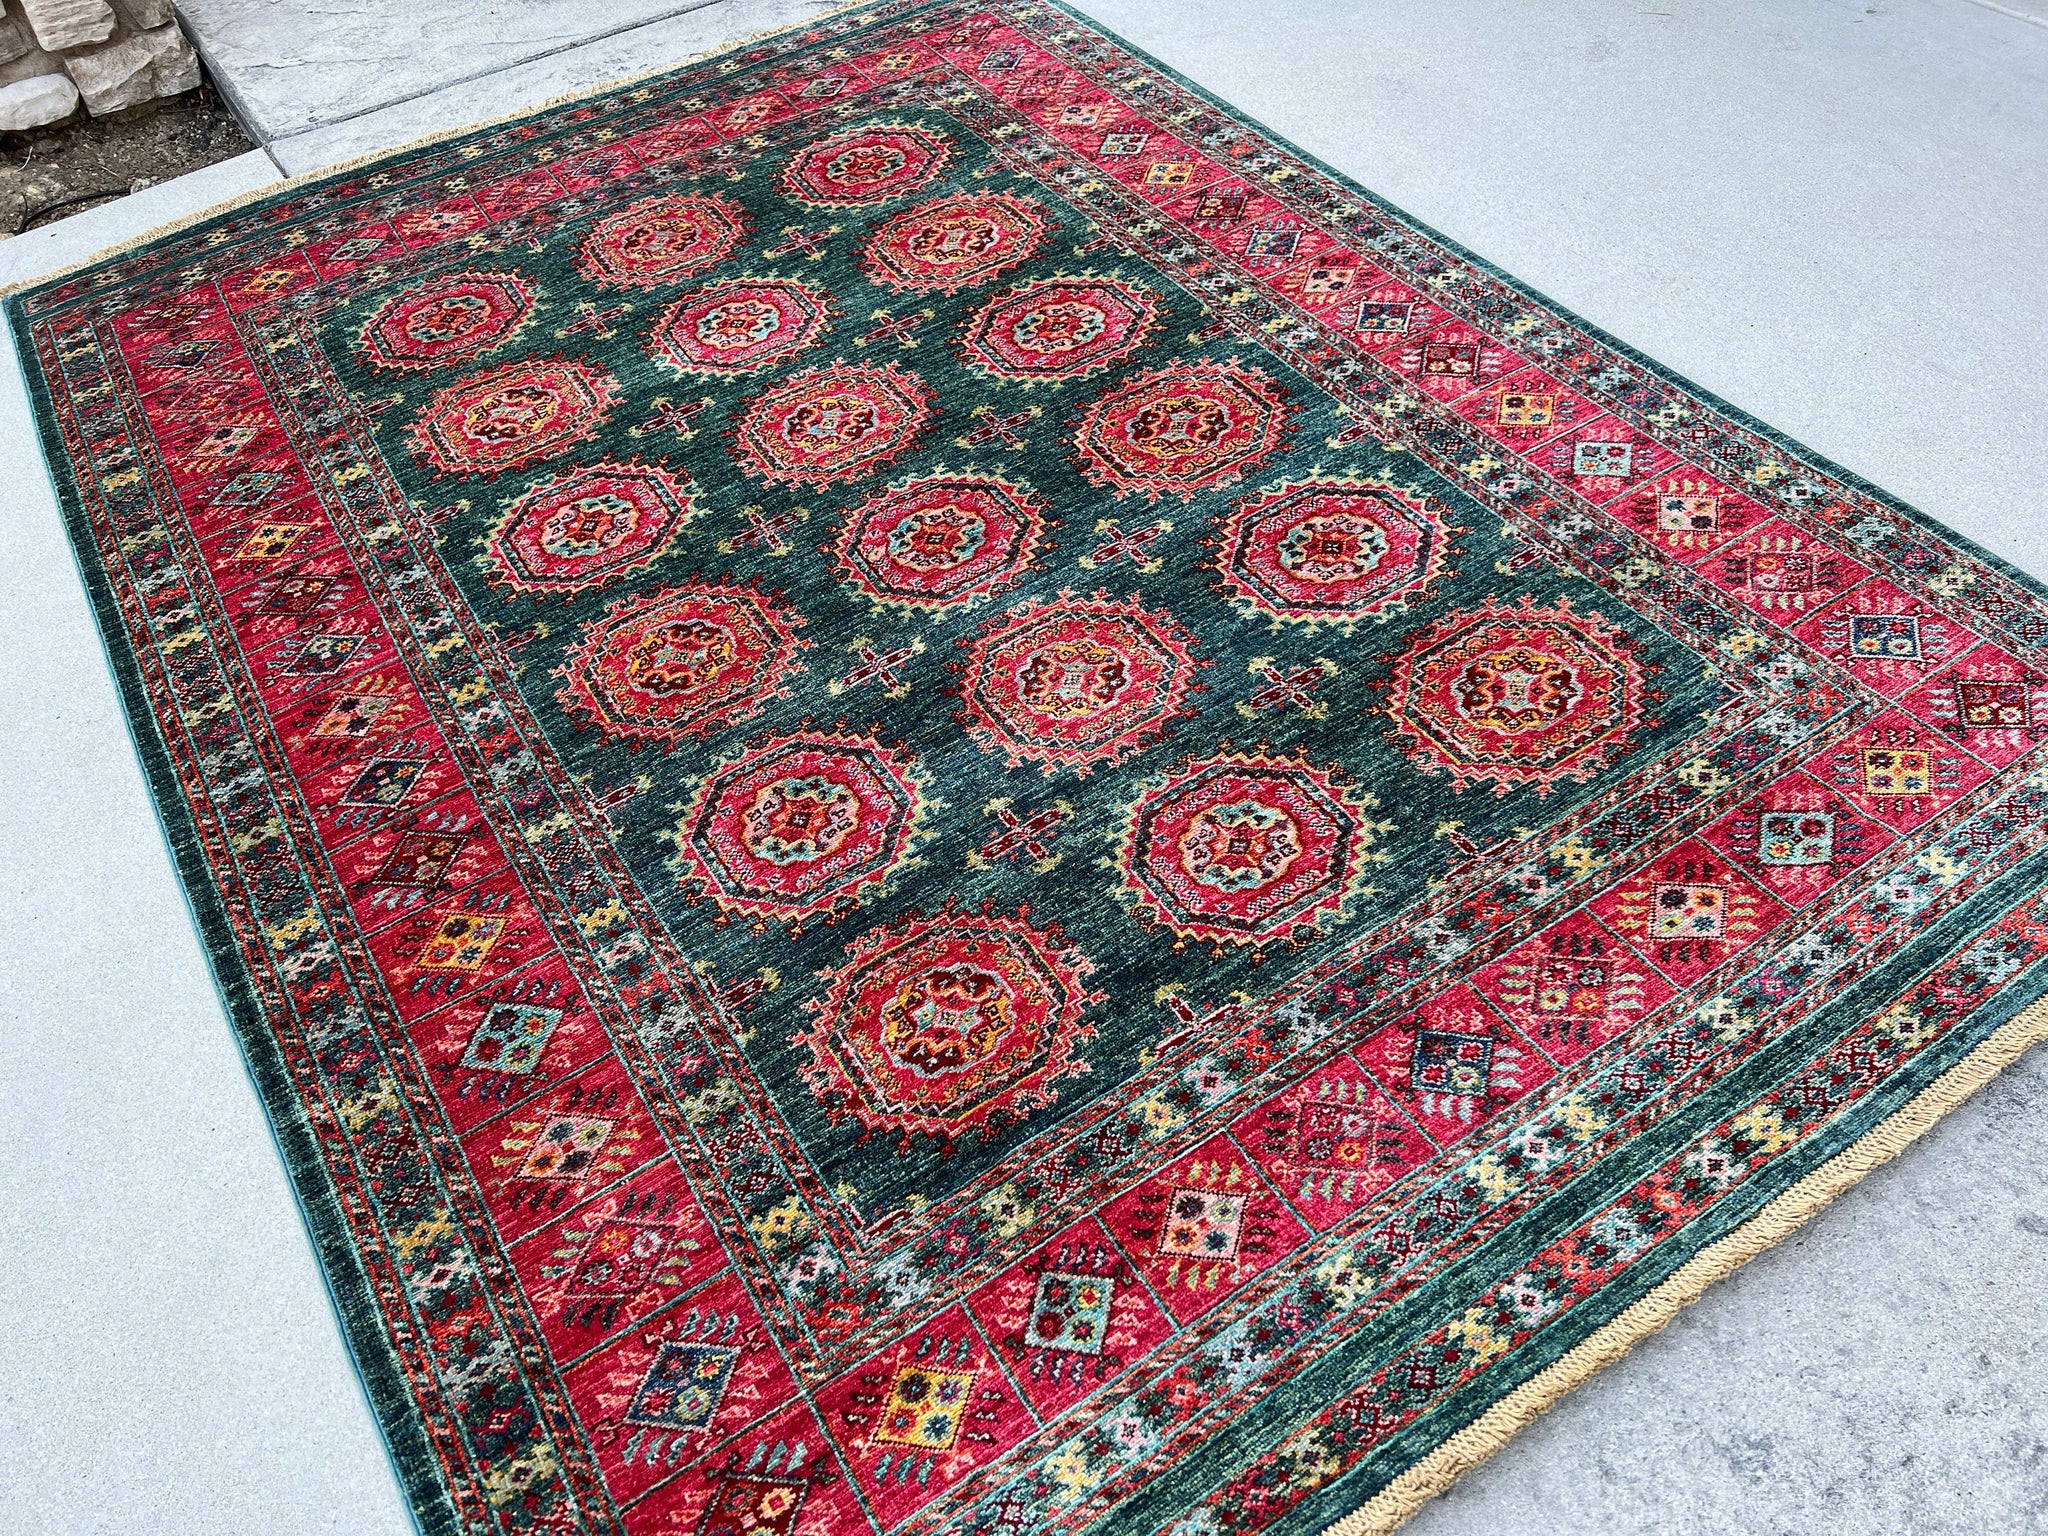 6x8 (180x245) Hand Knotted Handmade Afghan Rug | Dark Turquoise Ruby Red Pine Green Yellow Cream Maroon Yellow Green Pink Blue Orange Gold